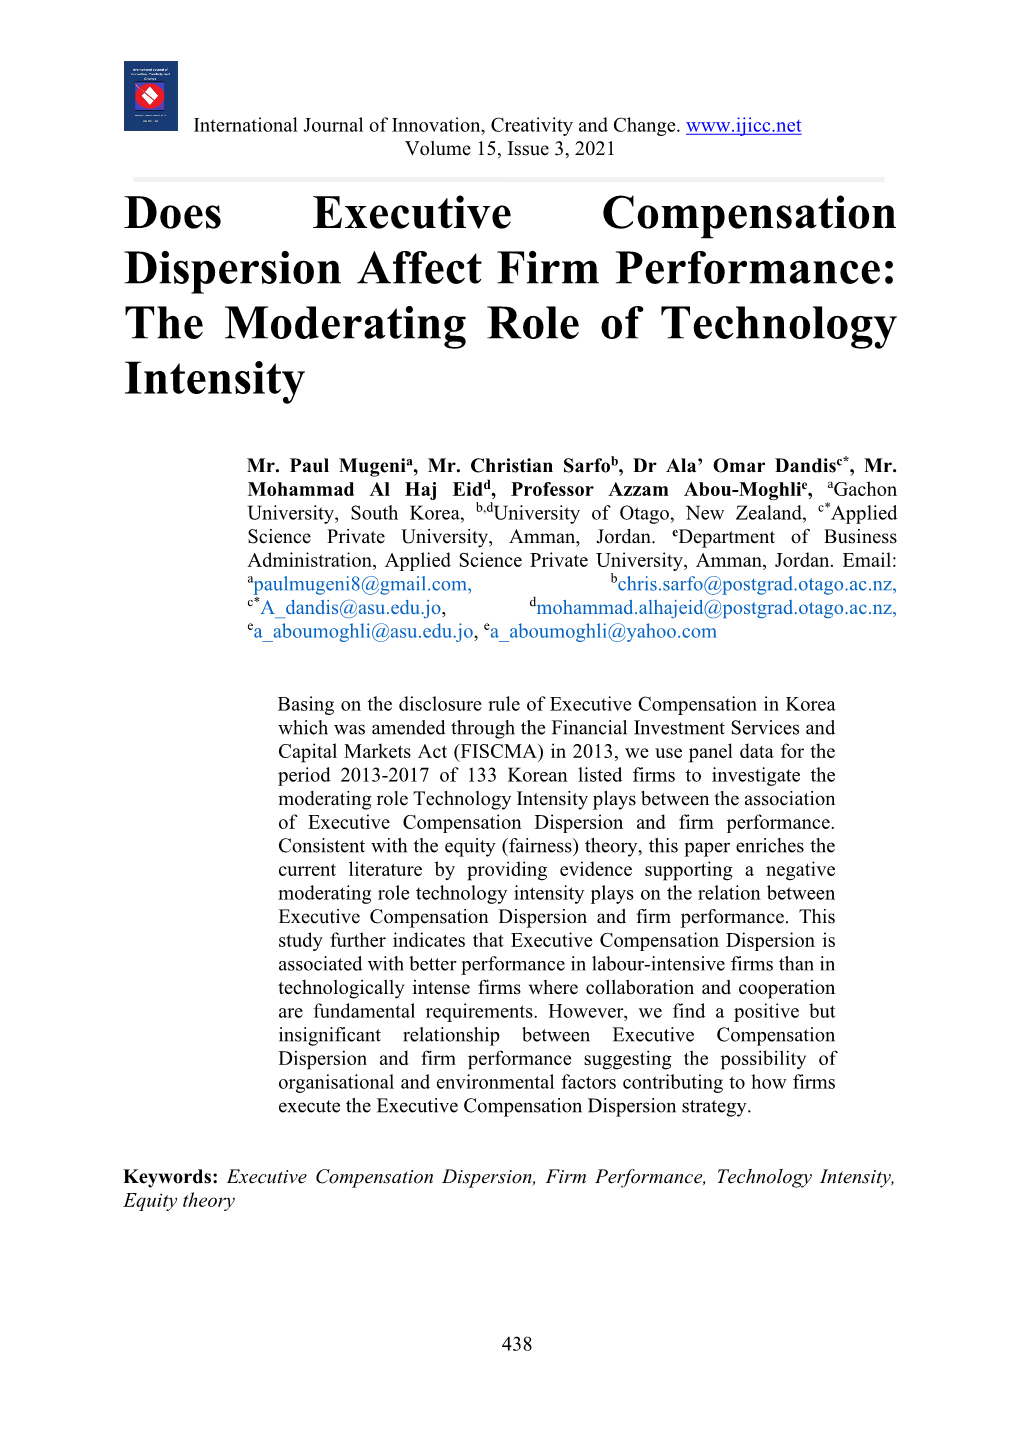 Does Executive Compensation Dispersion Affect Firm Performance: the Moderating Role of Technology Intensity